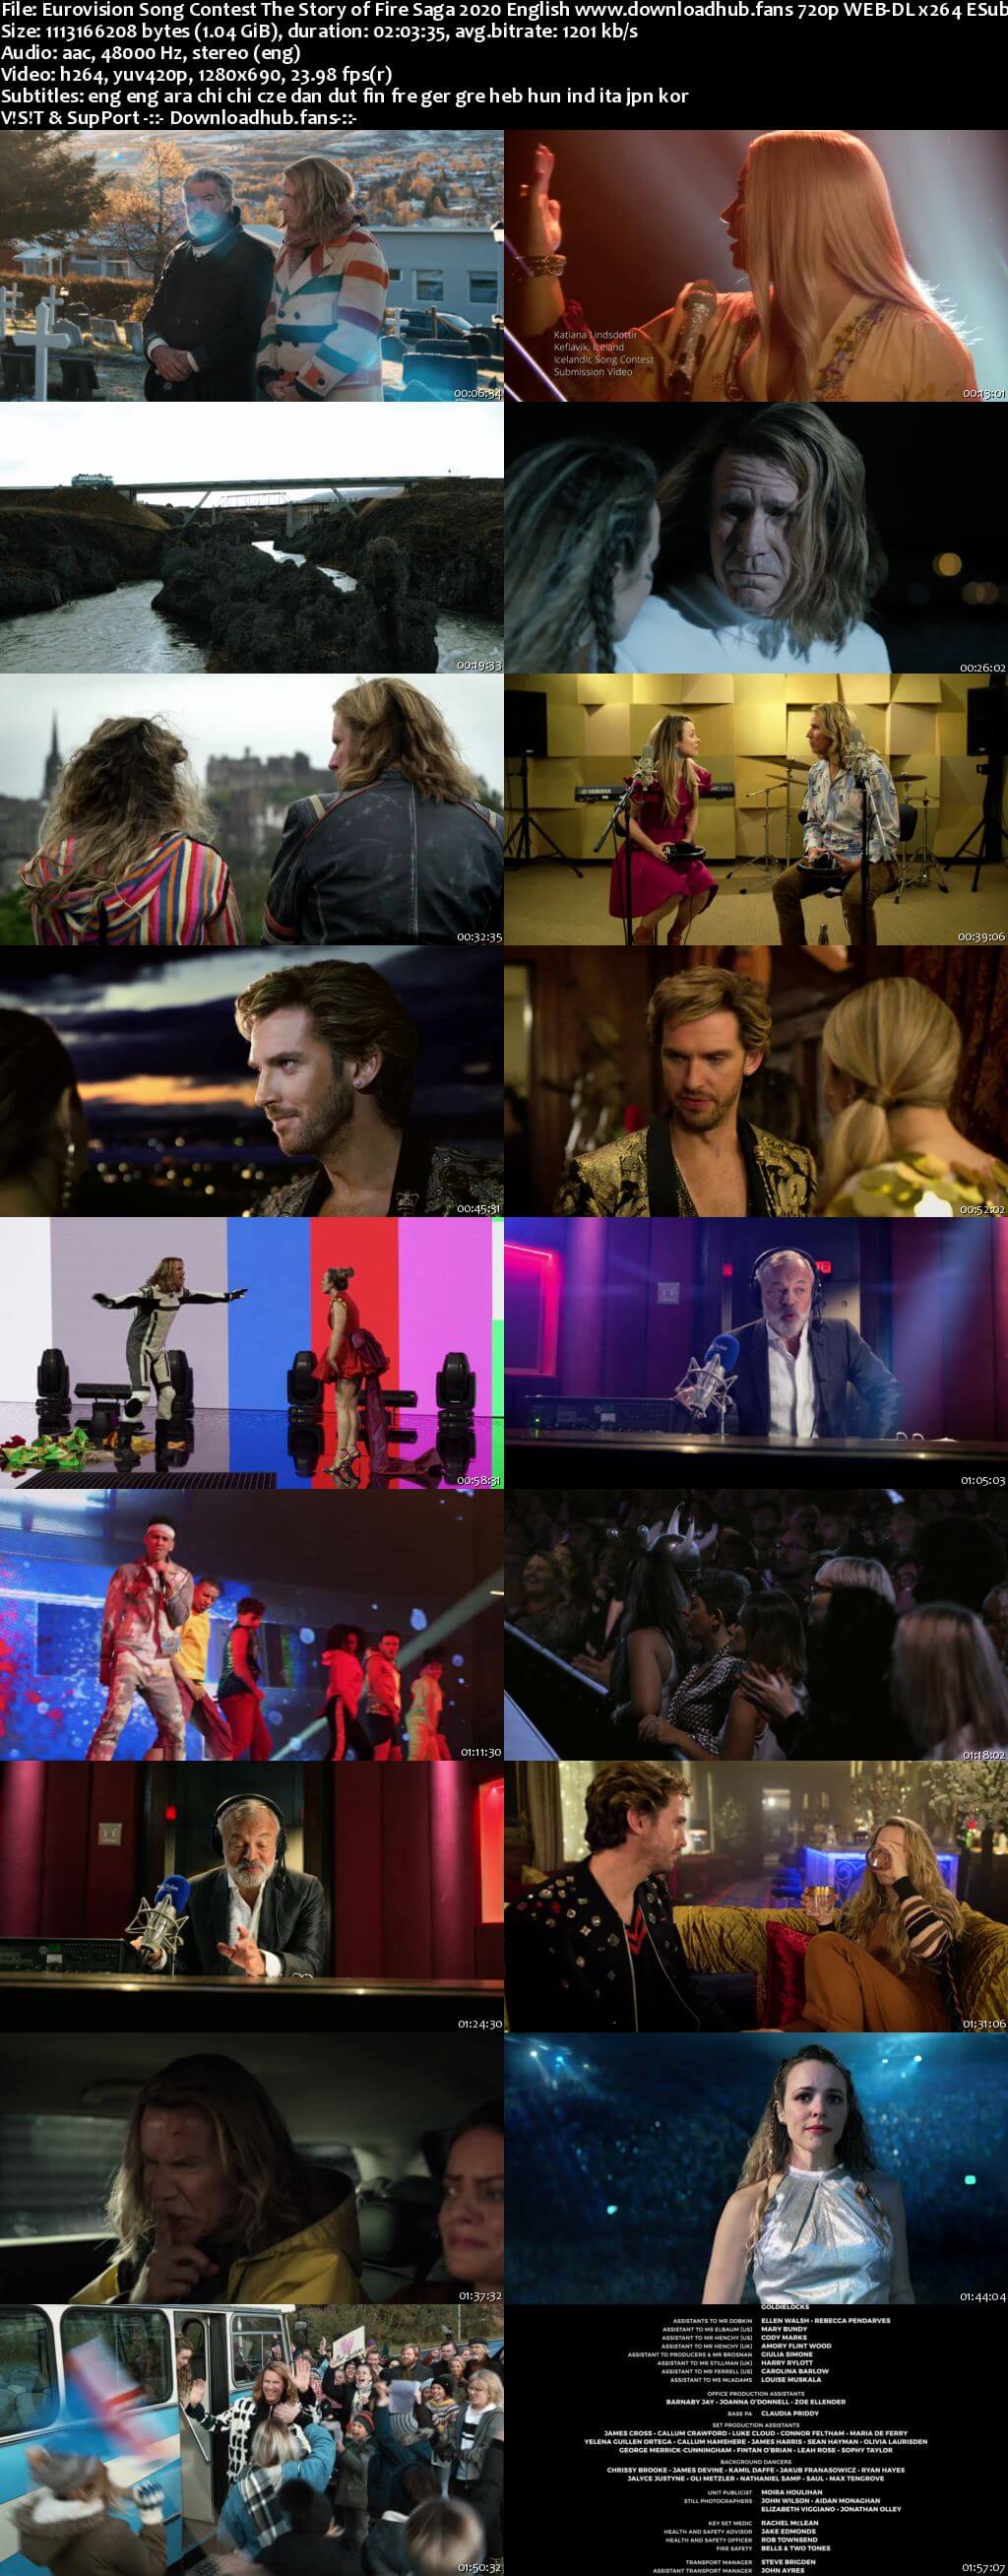 Eurovision Song Contest The Story of Fire Saga 2020 English 720p NF Web-DL 1GB MSubs